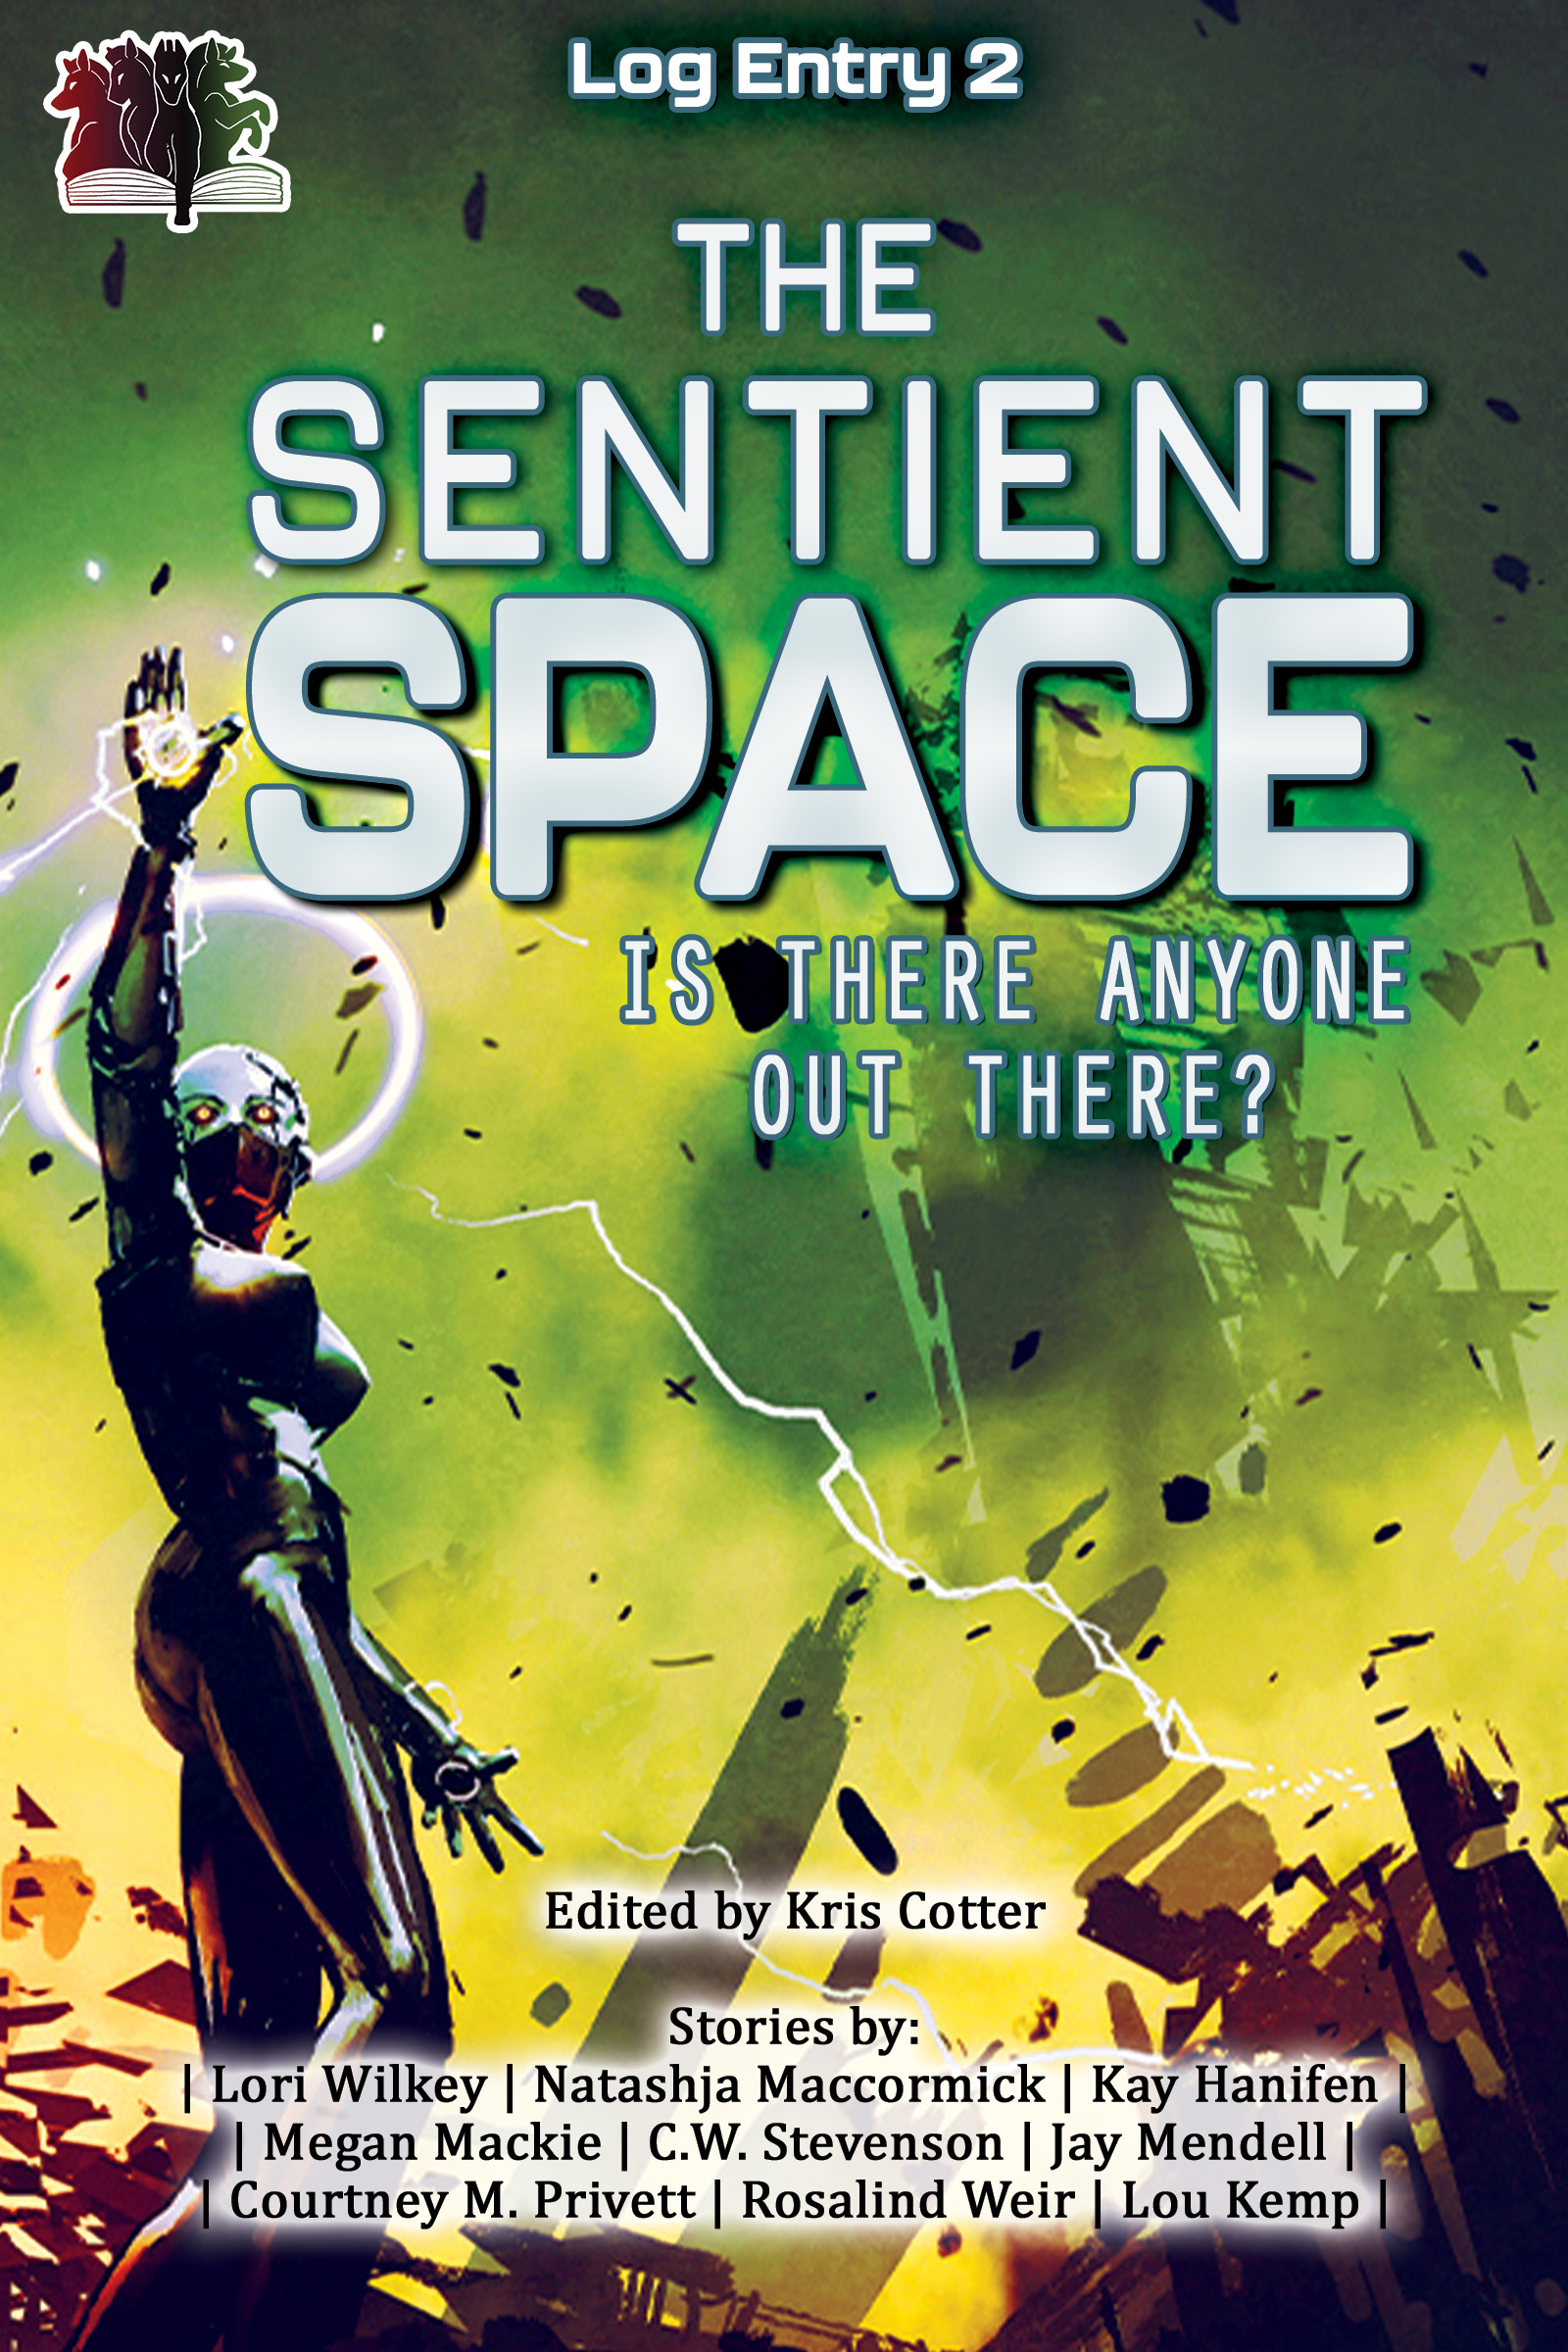 Pre-Order Now: The Sentient Space – Log Entry 2